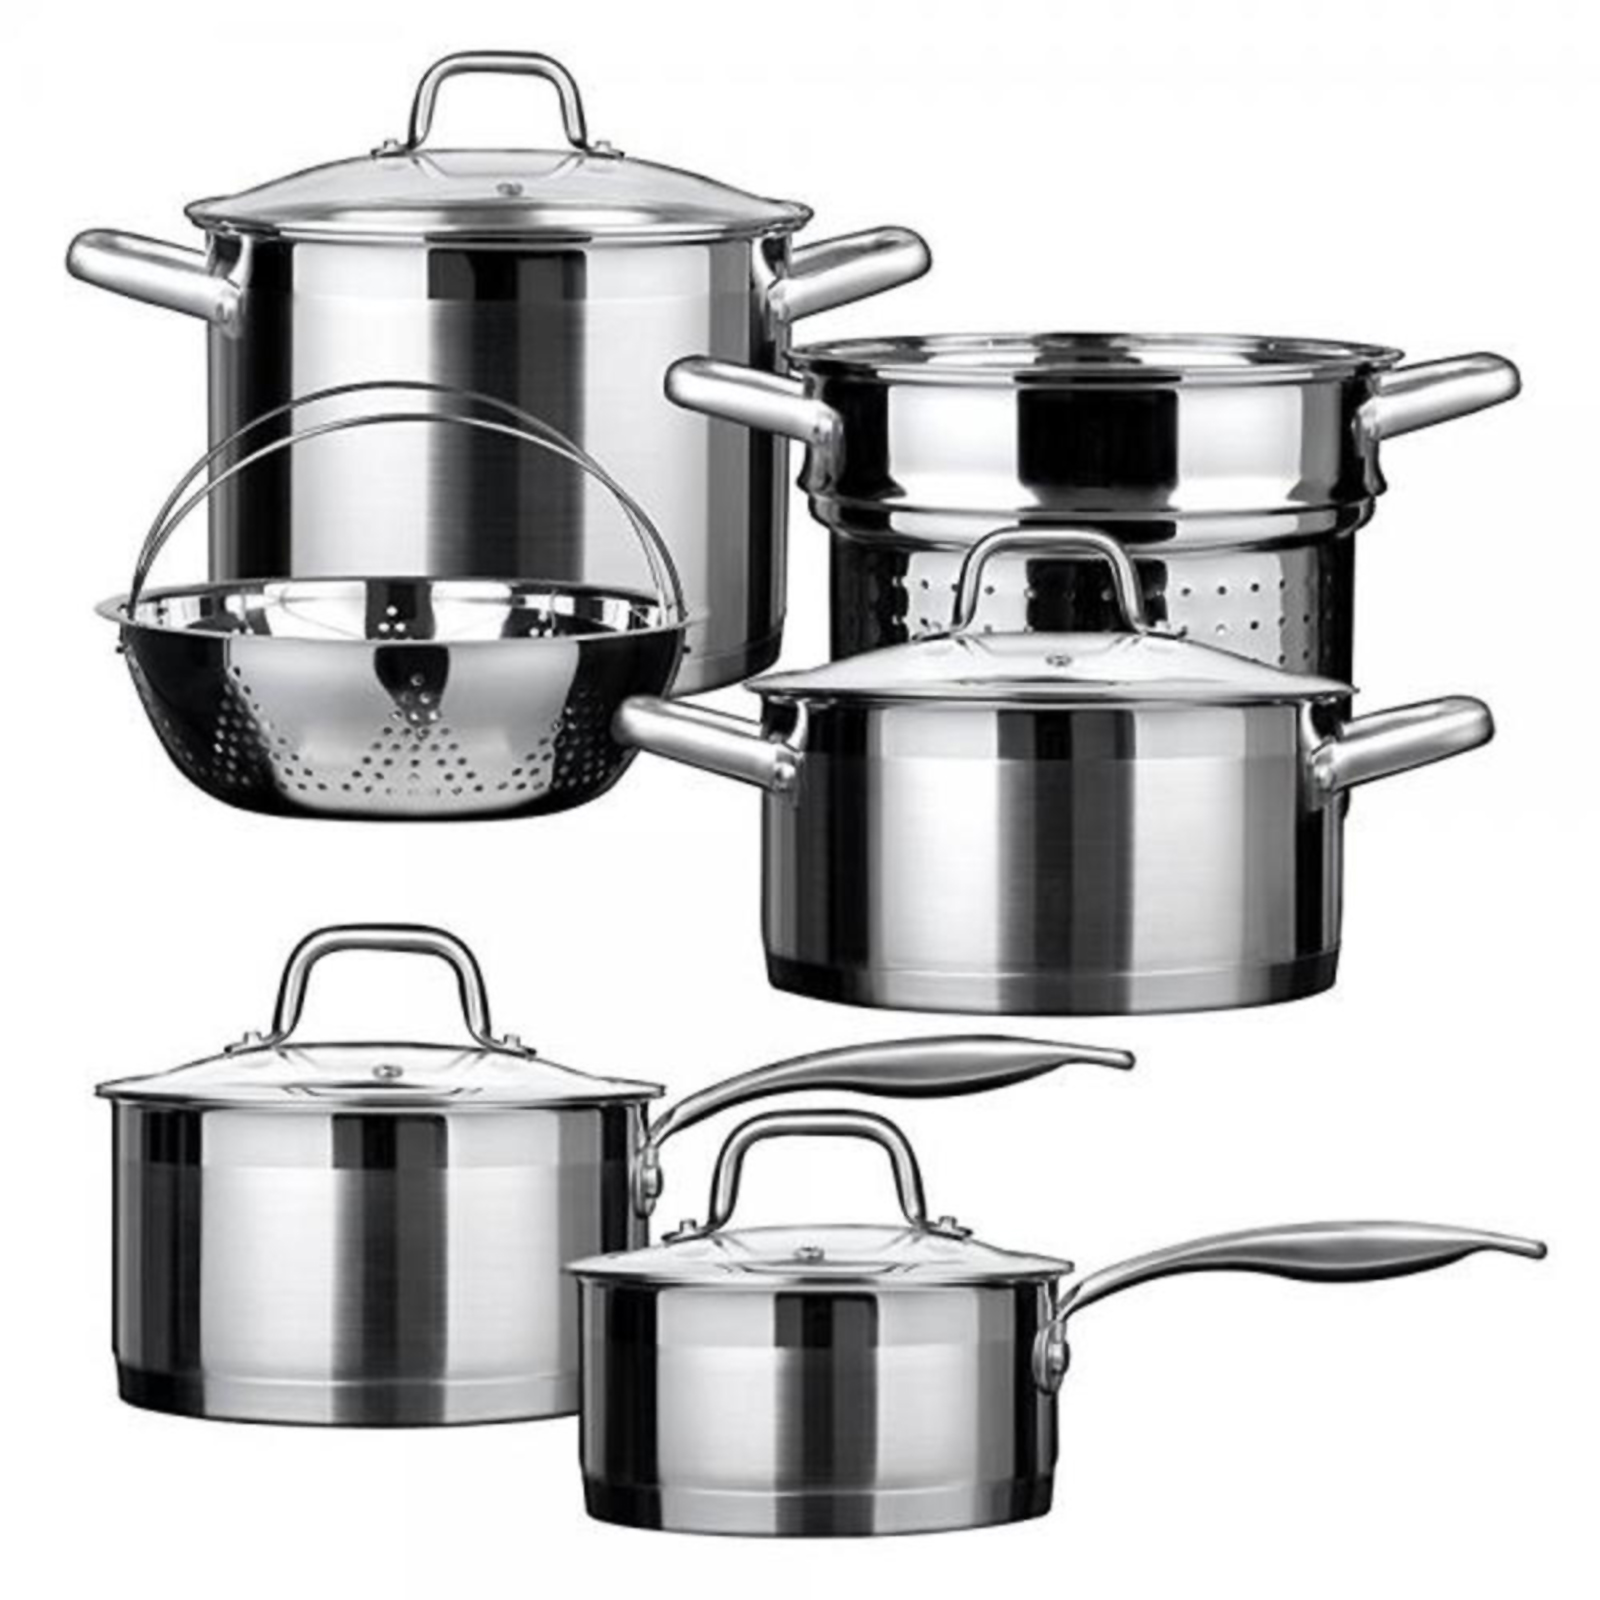 DUXTOP 10pc. Stainless Steel Impact-Bonded Cookware Set